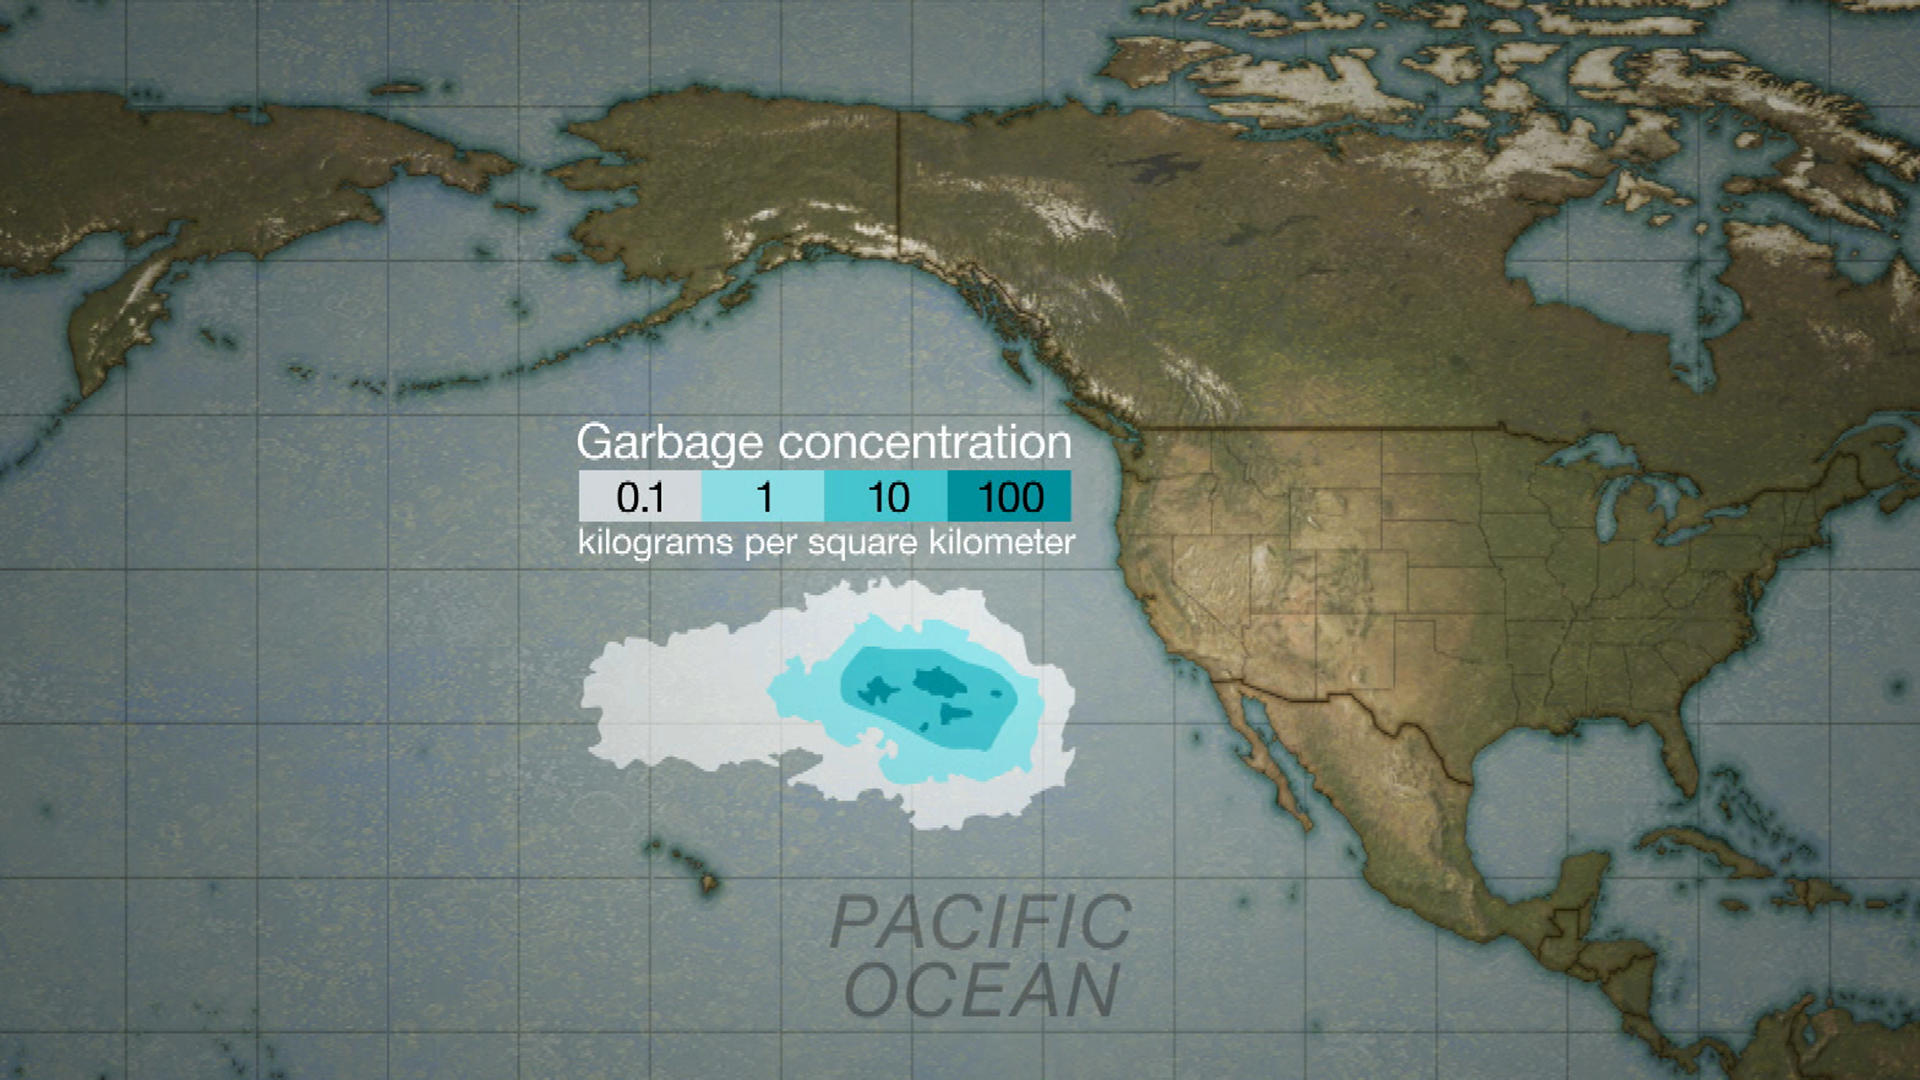 great pacific garbage patch map